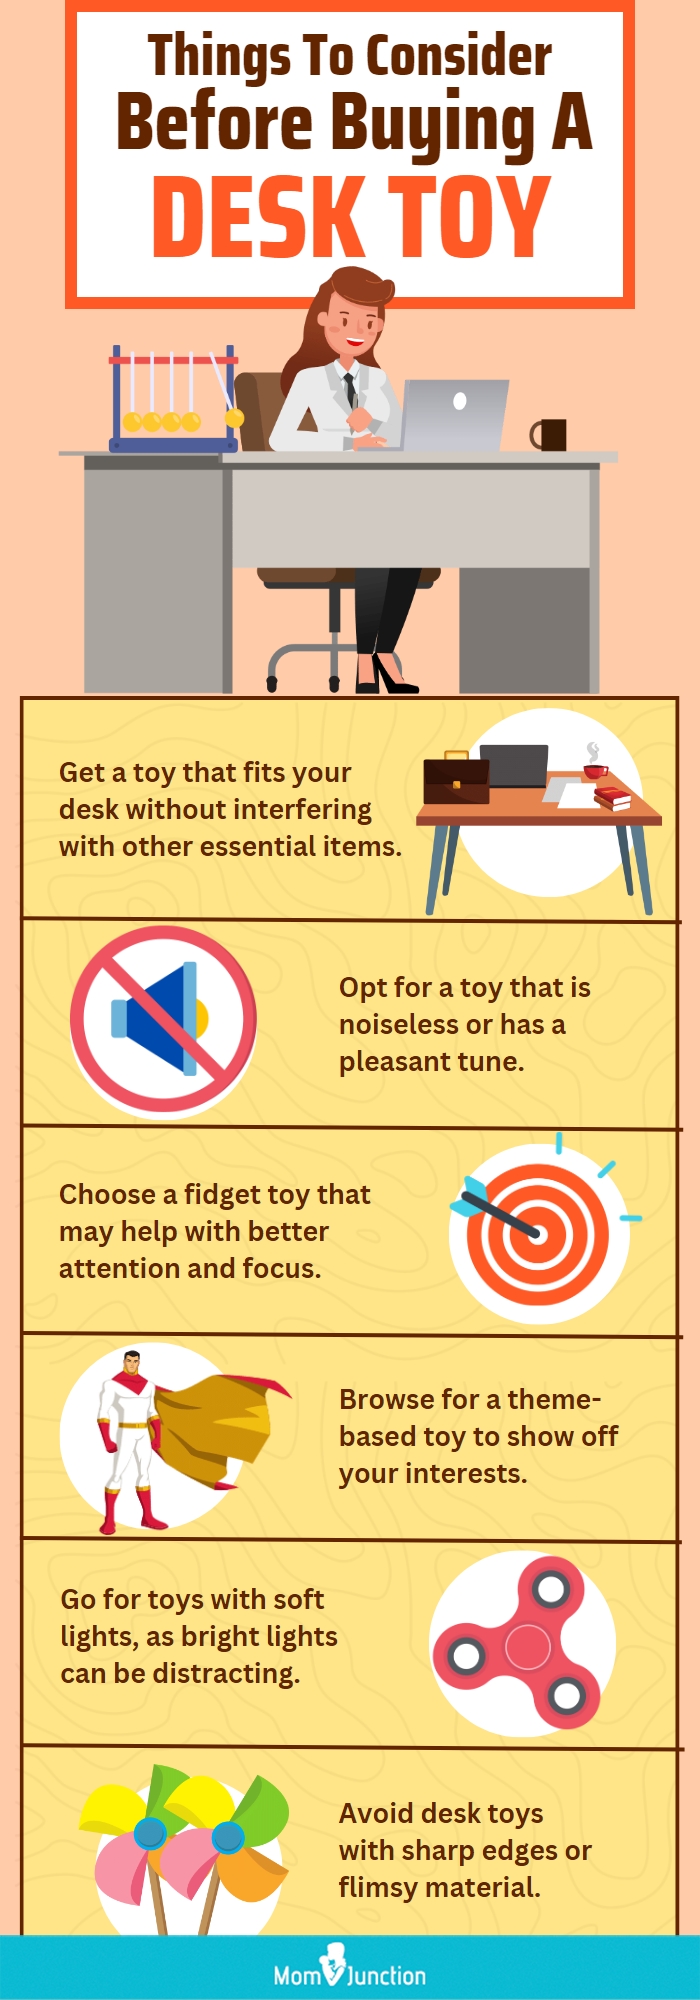 Things To Consider Before Buying A Desk Toy 176 Content Topics